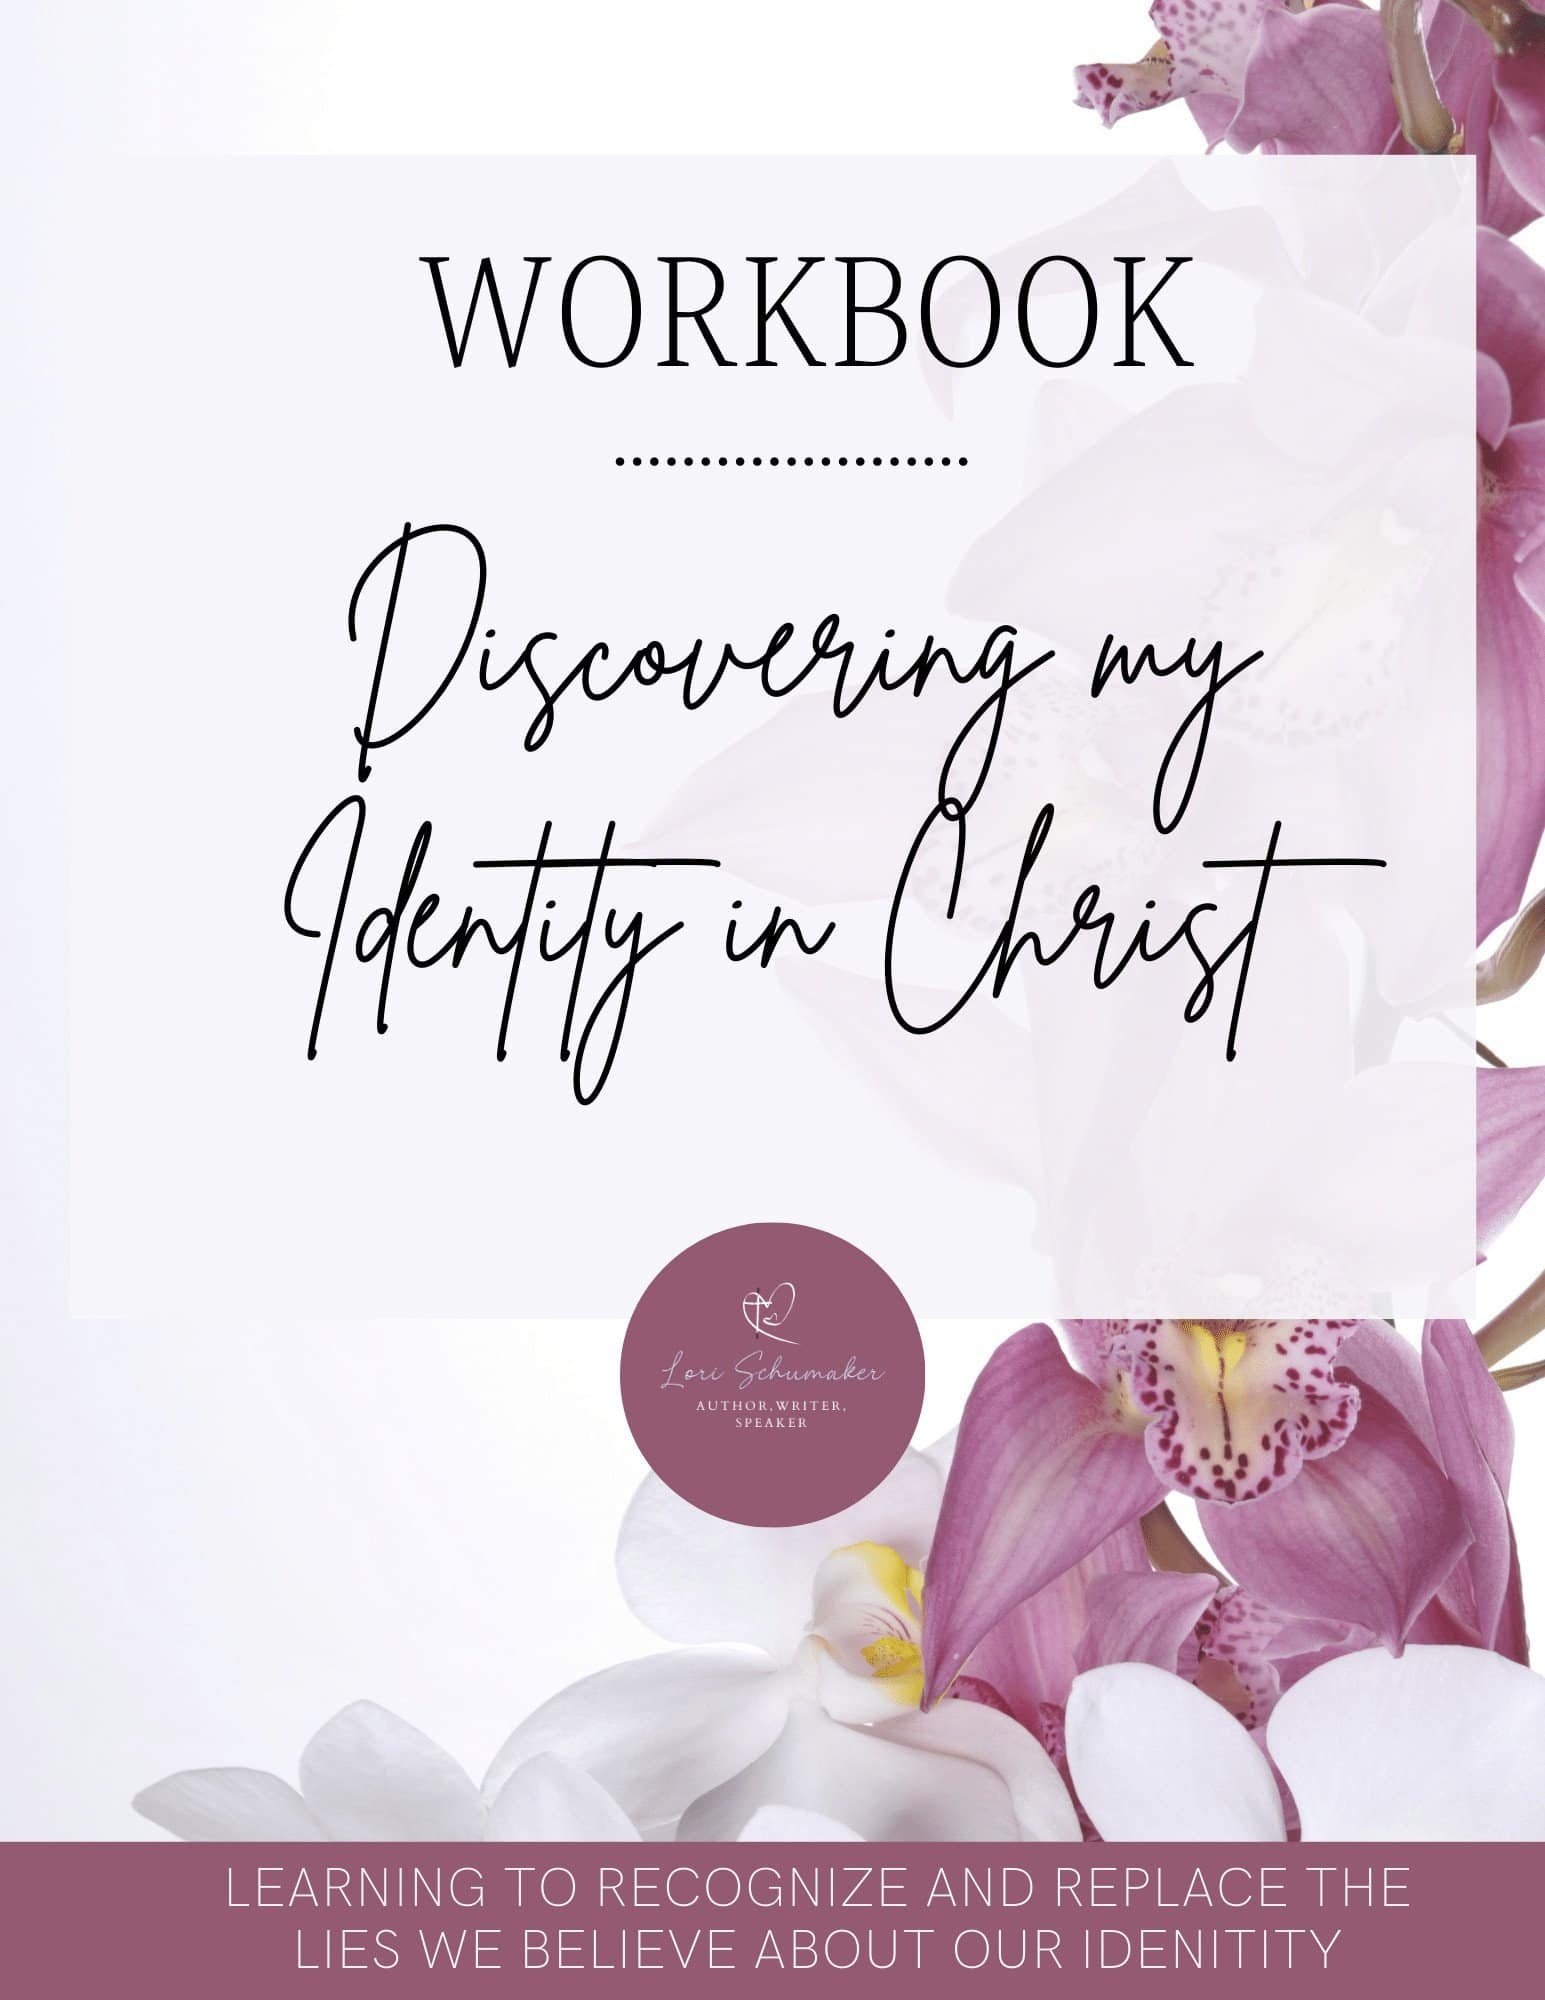 your identity in christ